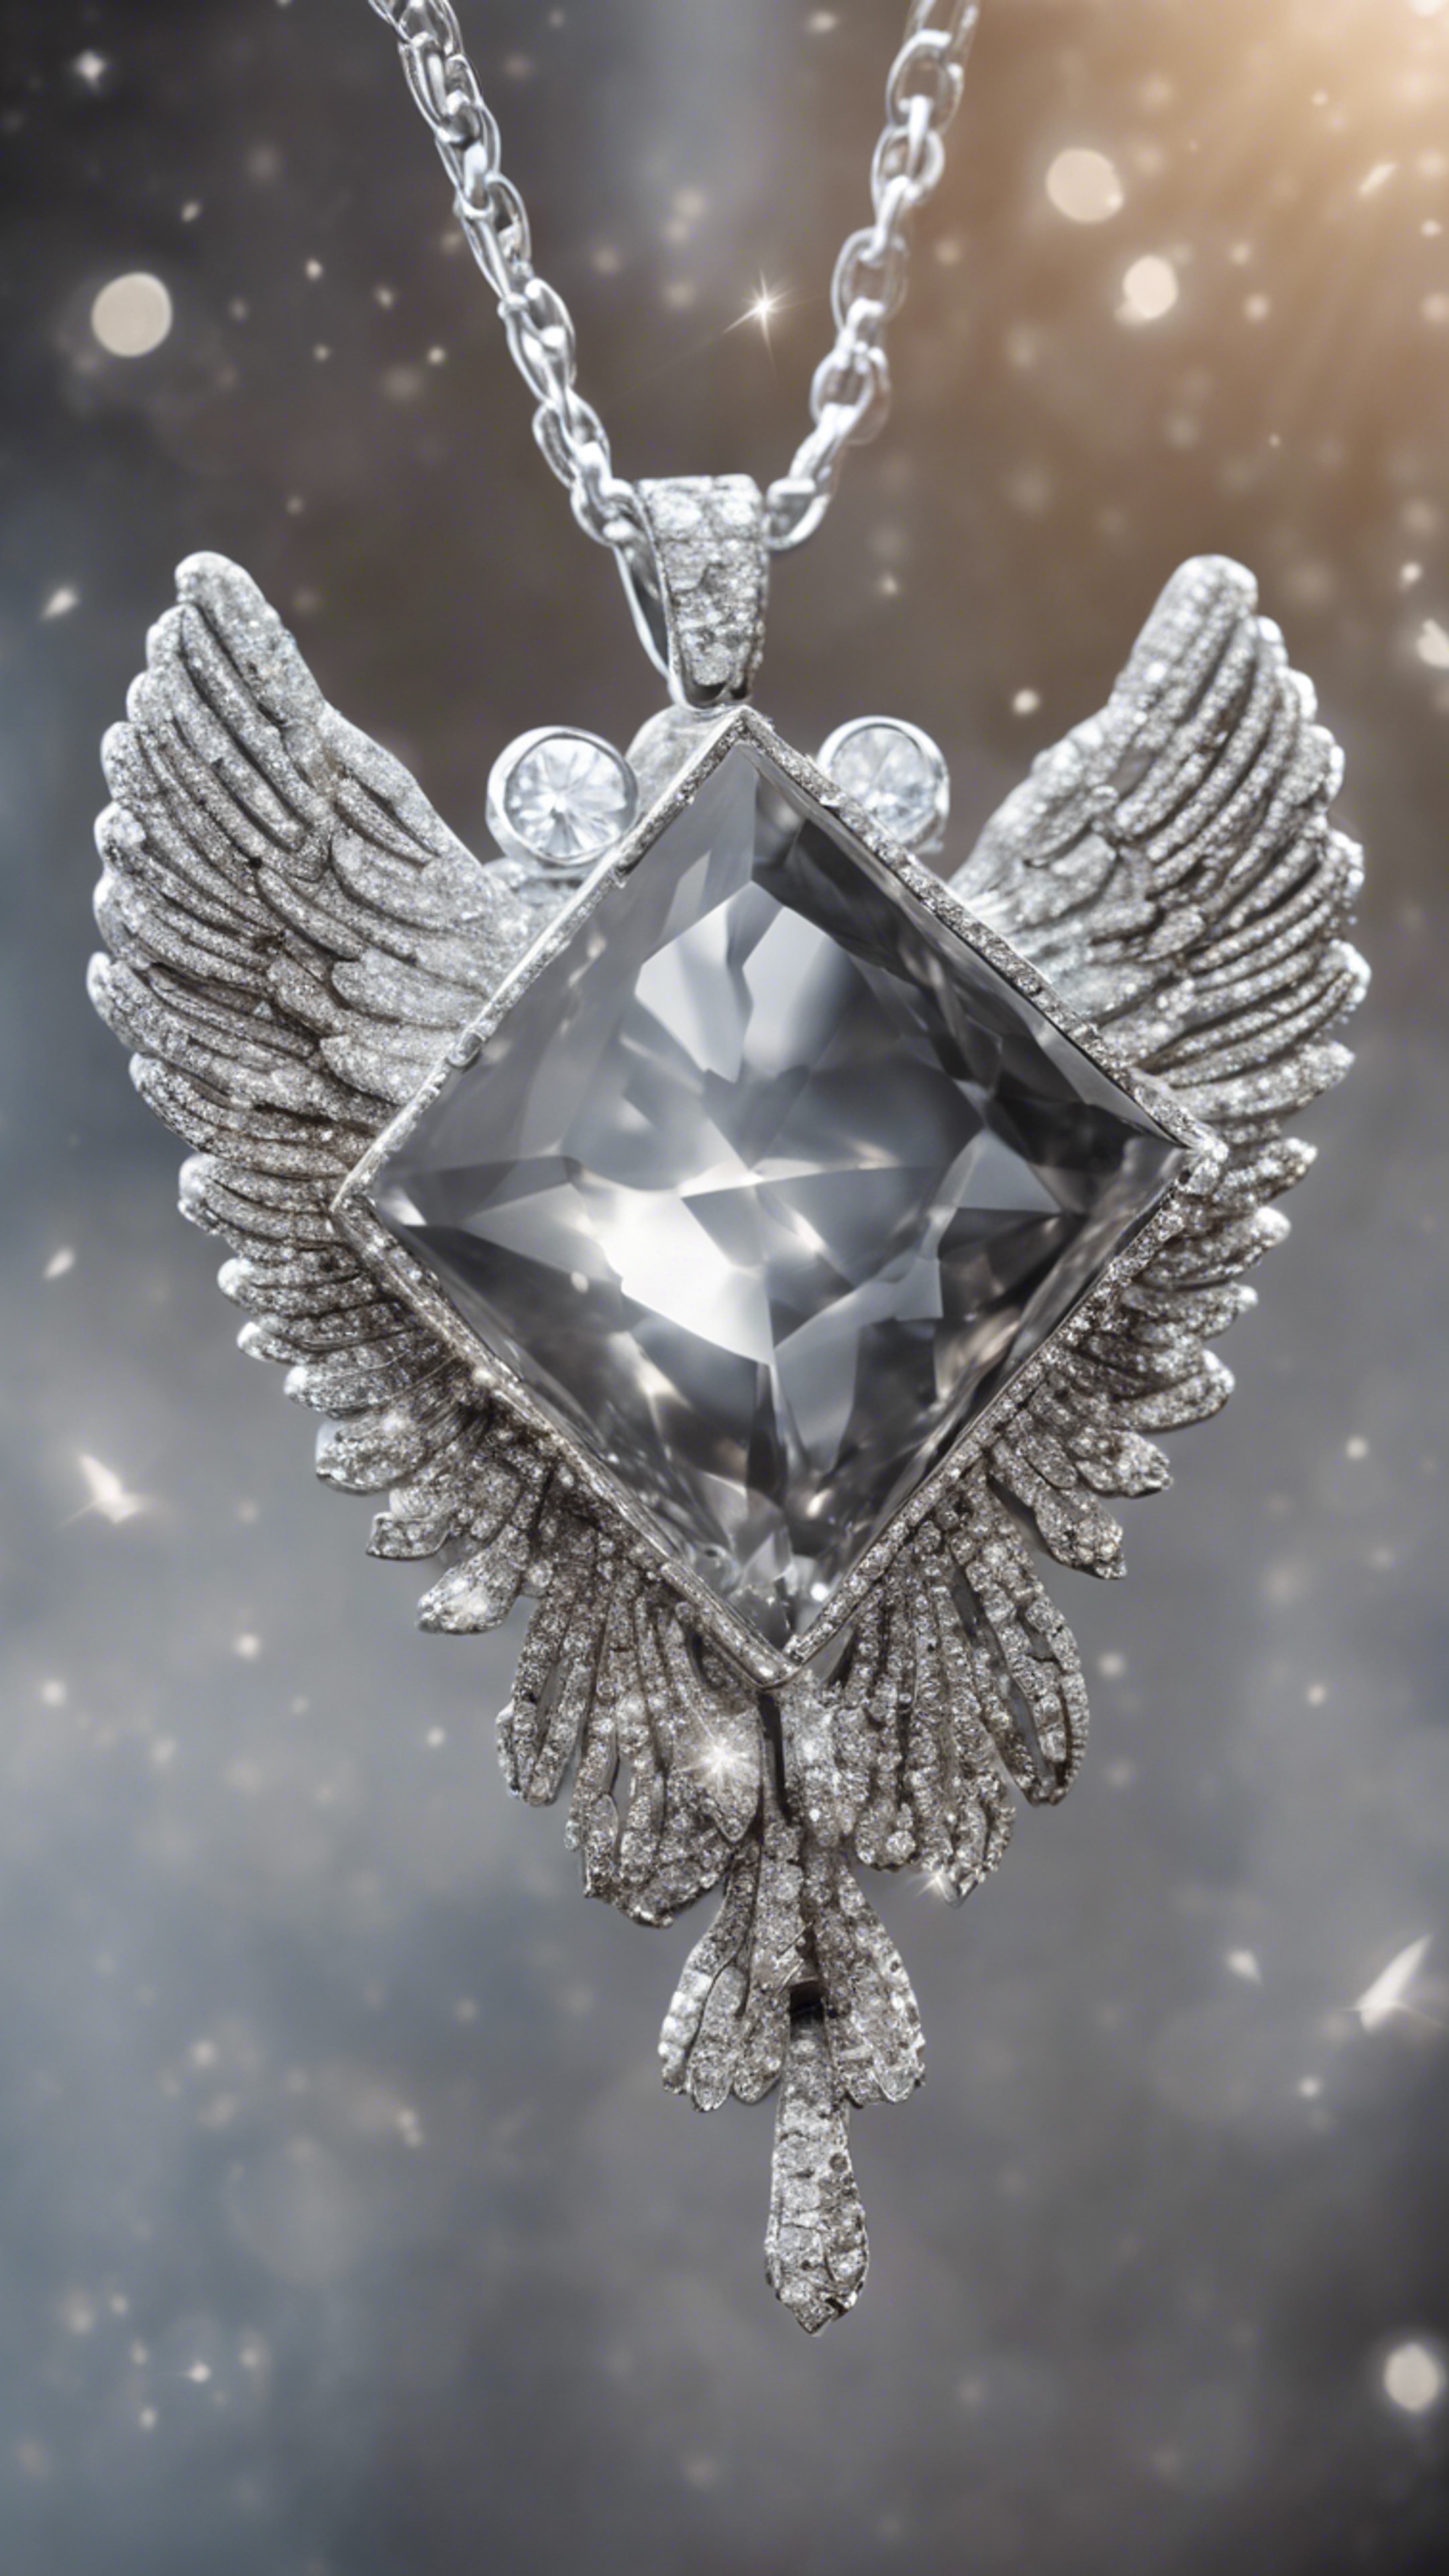 A gray diamond wrapped in the wings of a silver angel pendant. Tapet[ad1b9e387c144e34b8b5]